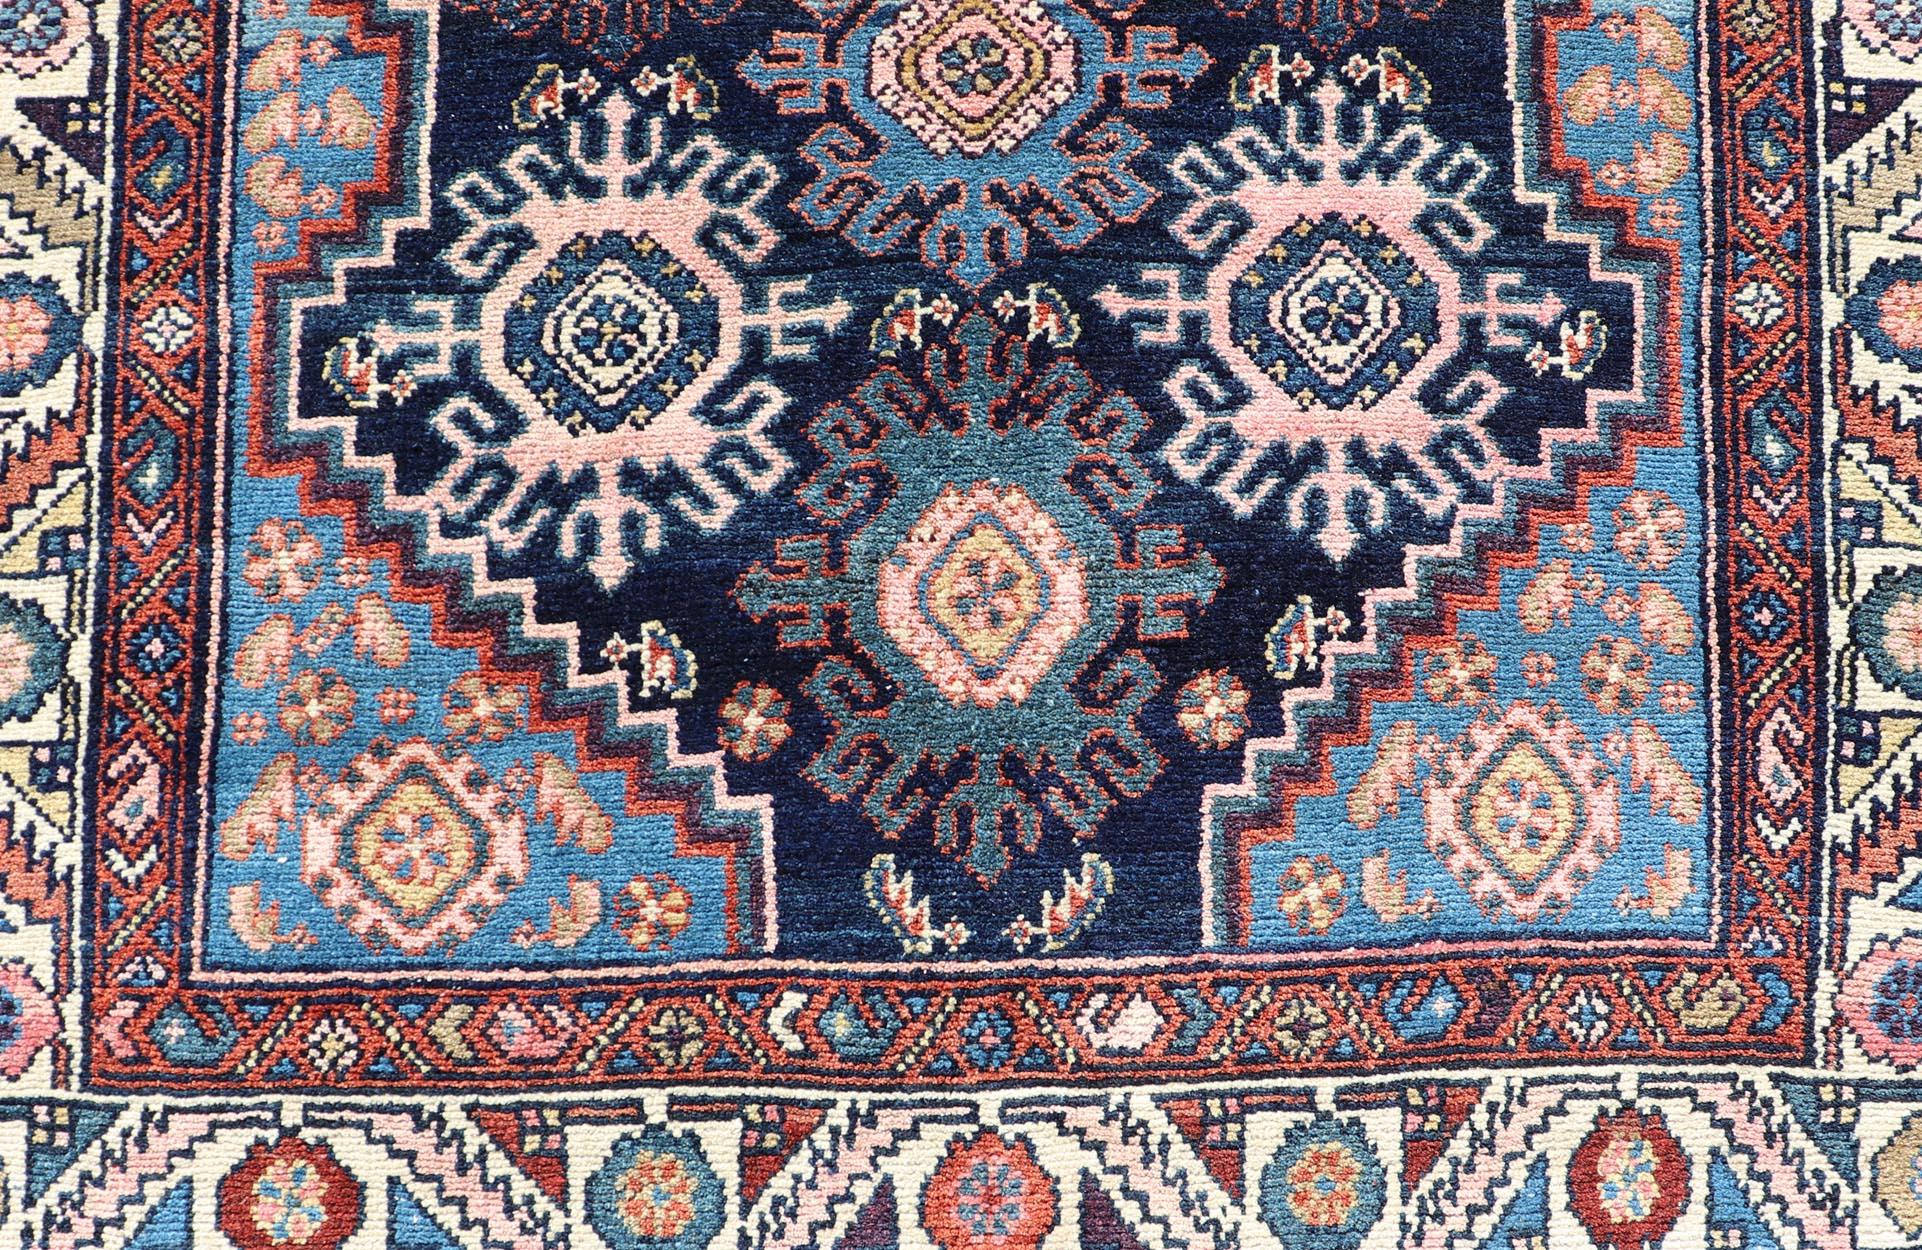 20th Century Antique Persian Hamadan Runner with All-Over Geometric Motifs In Jewel Tones For Sale